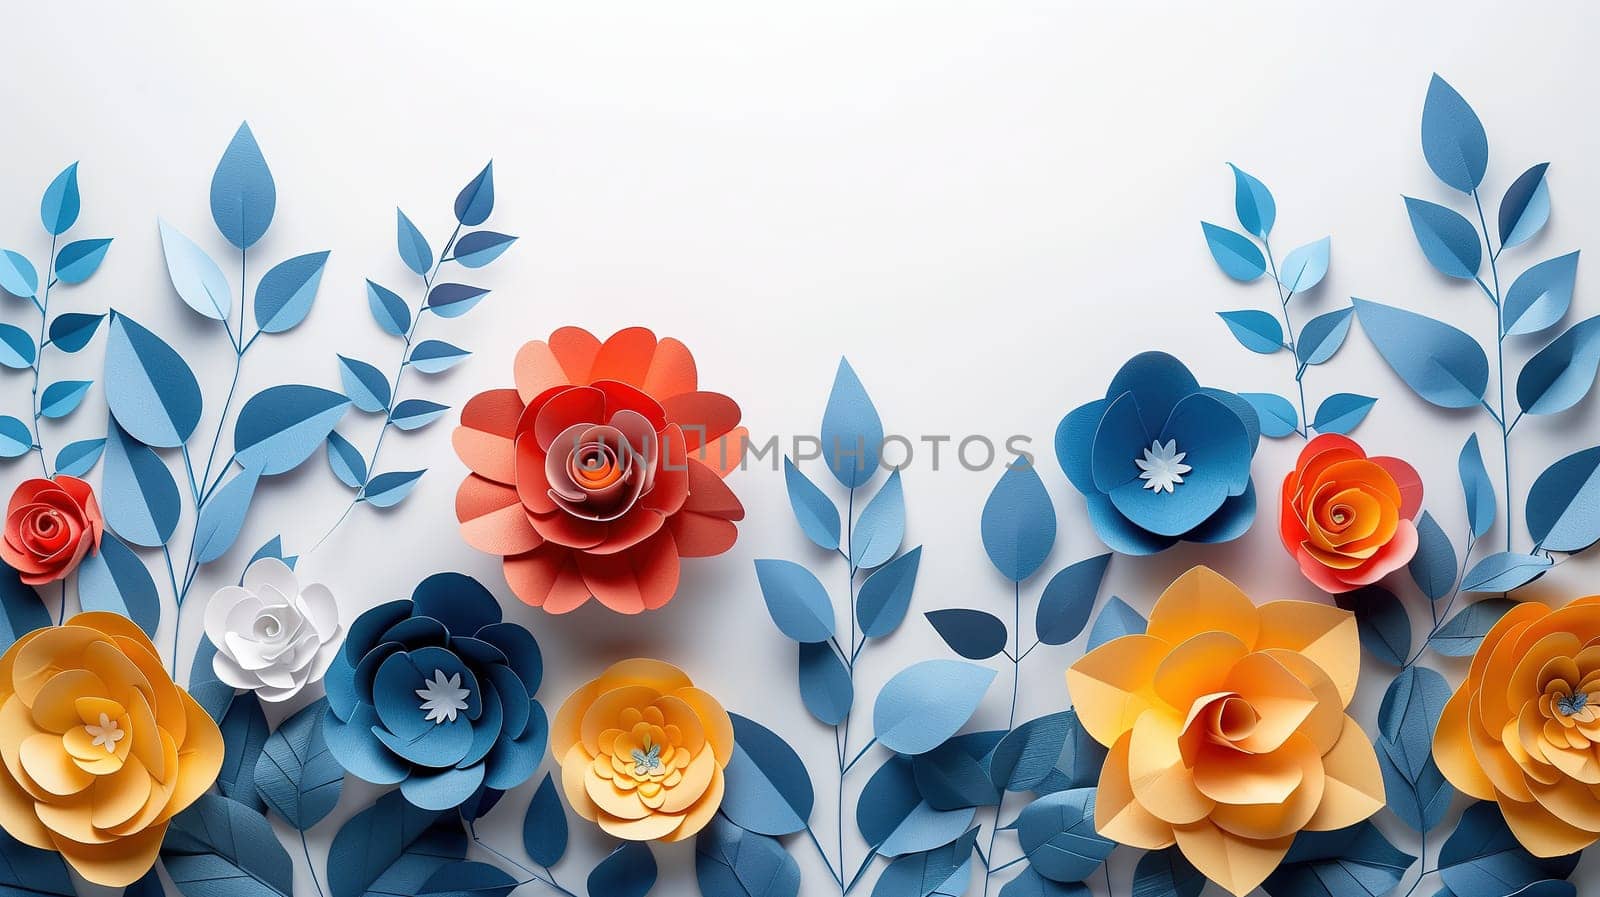 A group of paper flowers are arranged neatly on top of a white wall. Each flower has vibrant colors and intricate designs, adding a pop of color to the minimalist background.